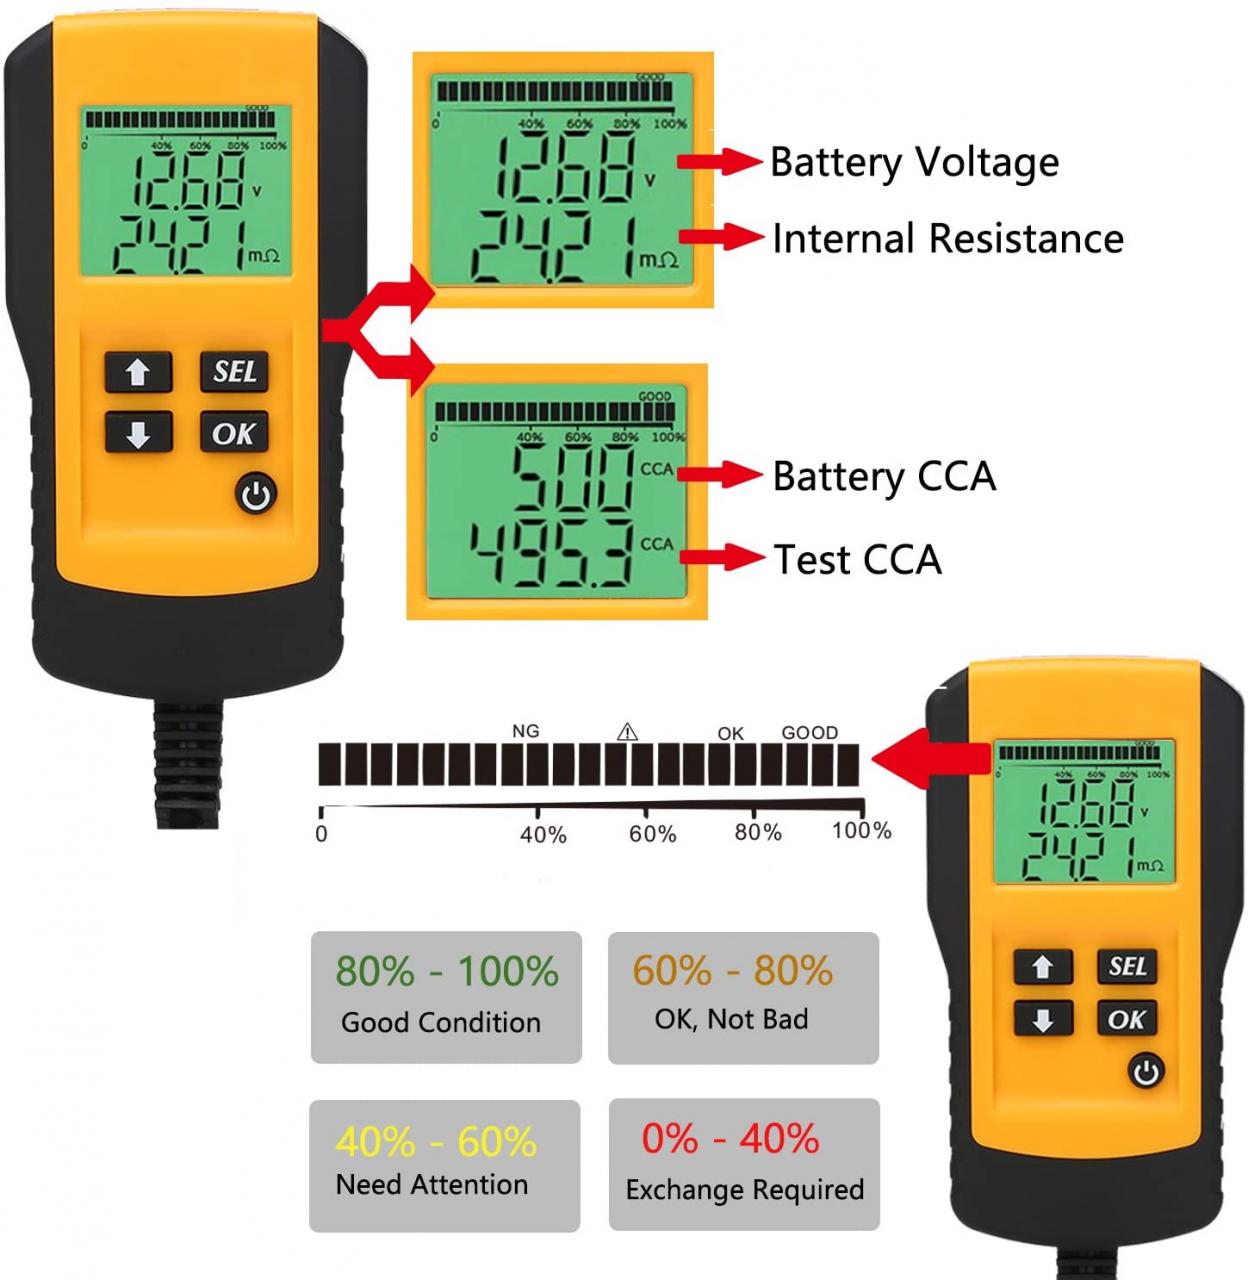 SUNER POWER Digital 12V Car Battery Tester Automotive Battery Load Tester  and Analyzer of Battery Life Percentage,Voltage, Resistance and CCA Value  for Flood, Gel, AGM, Deep Cycle Battery : Amazon.co.uk: Automotive